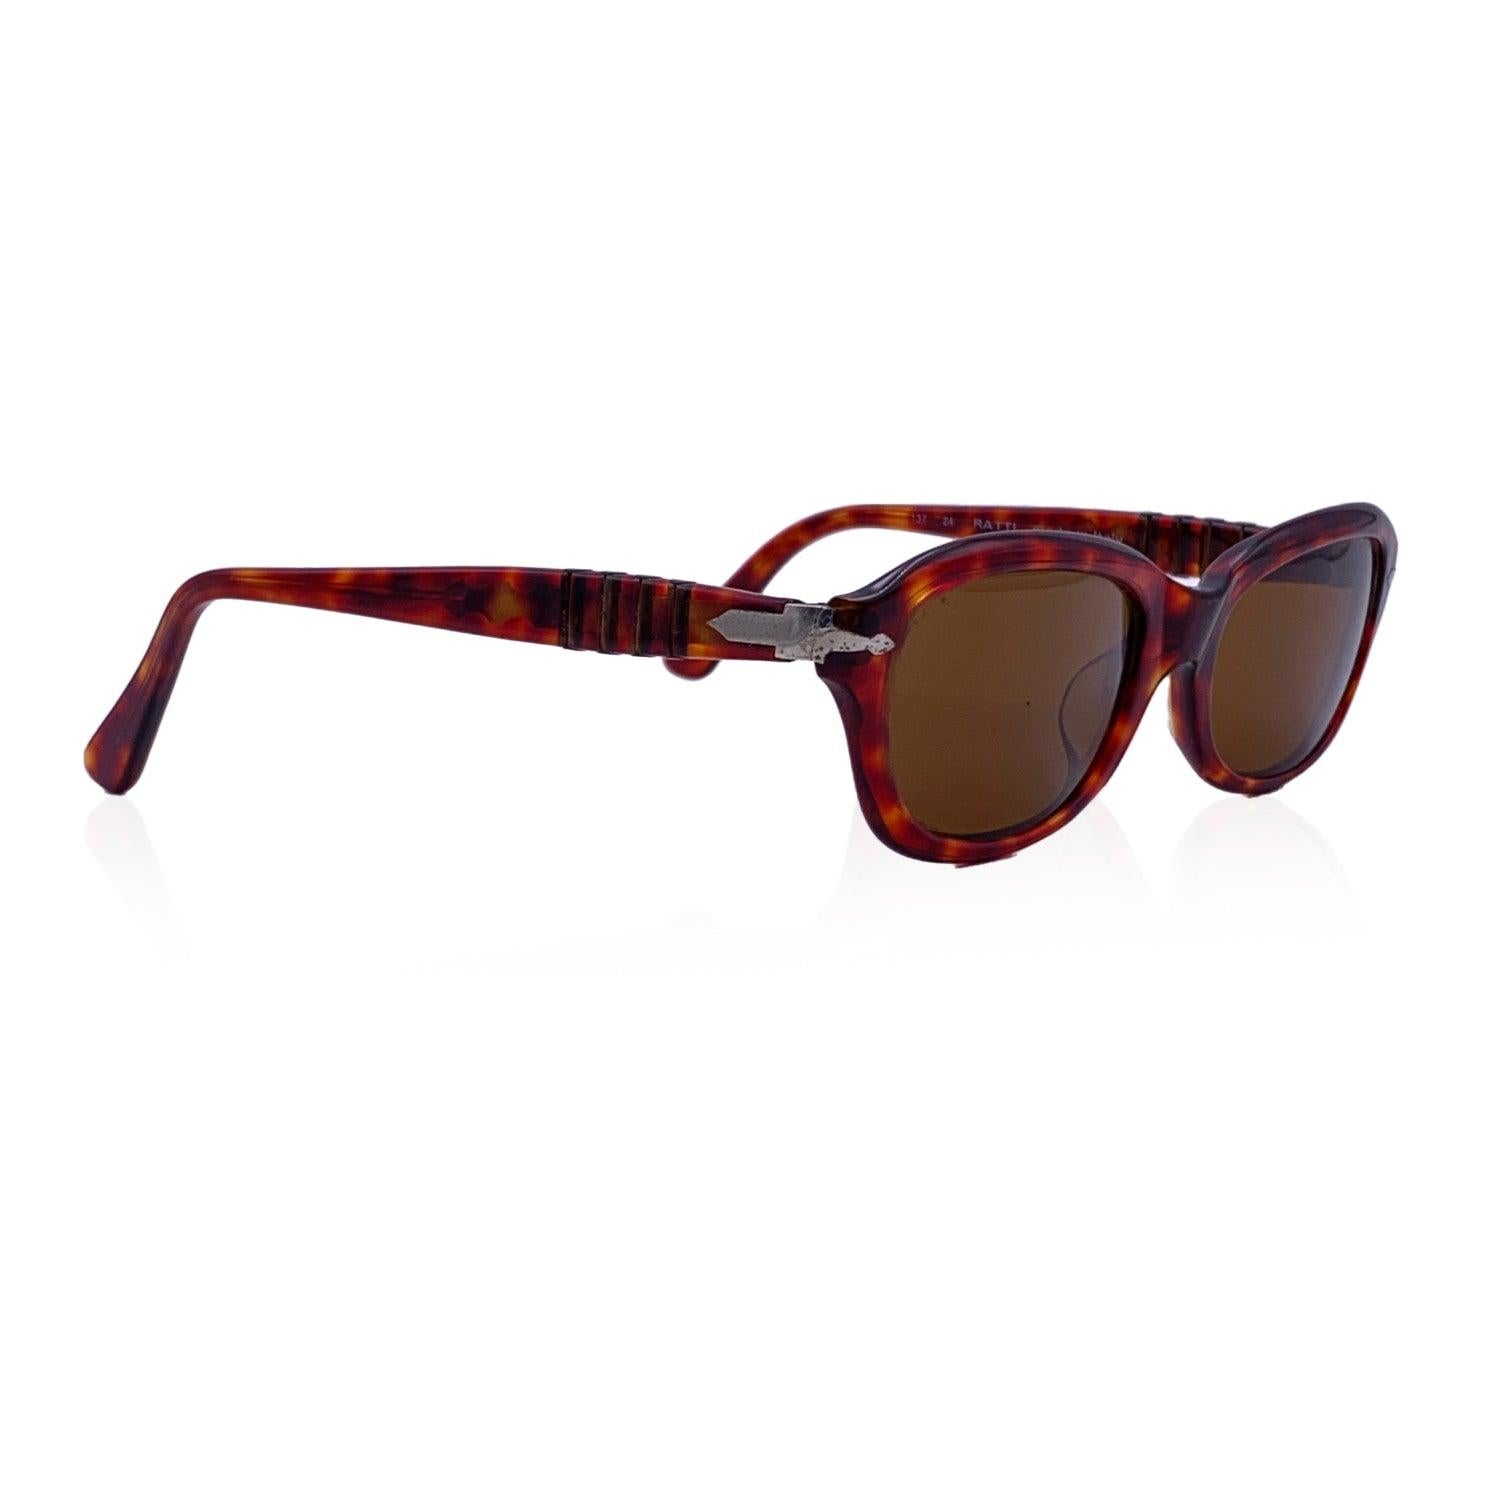 PERSOL RATTI Vintage early 1980s Sunglasses, mod. PP503. Brown Havana Acetate cat-eye frame. Brown Original PERSOL RATTI lens. Flexible temple (thanks to MEFLECTO System). Made in Italy Details MATERIAL: Acetate COLOR: Brown MODEL: PP503 GENDER: